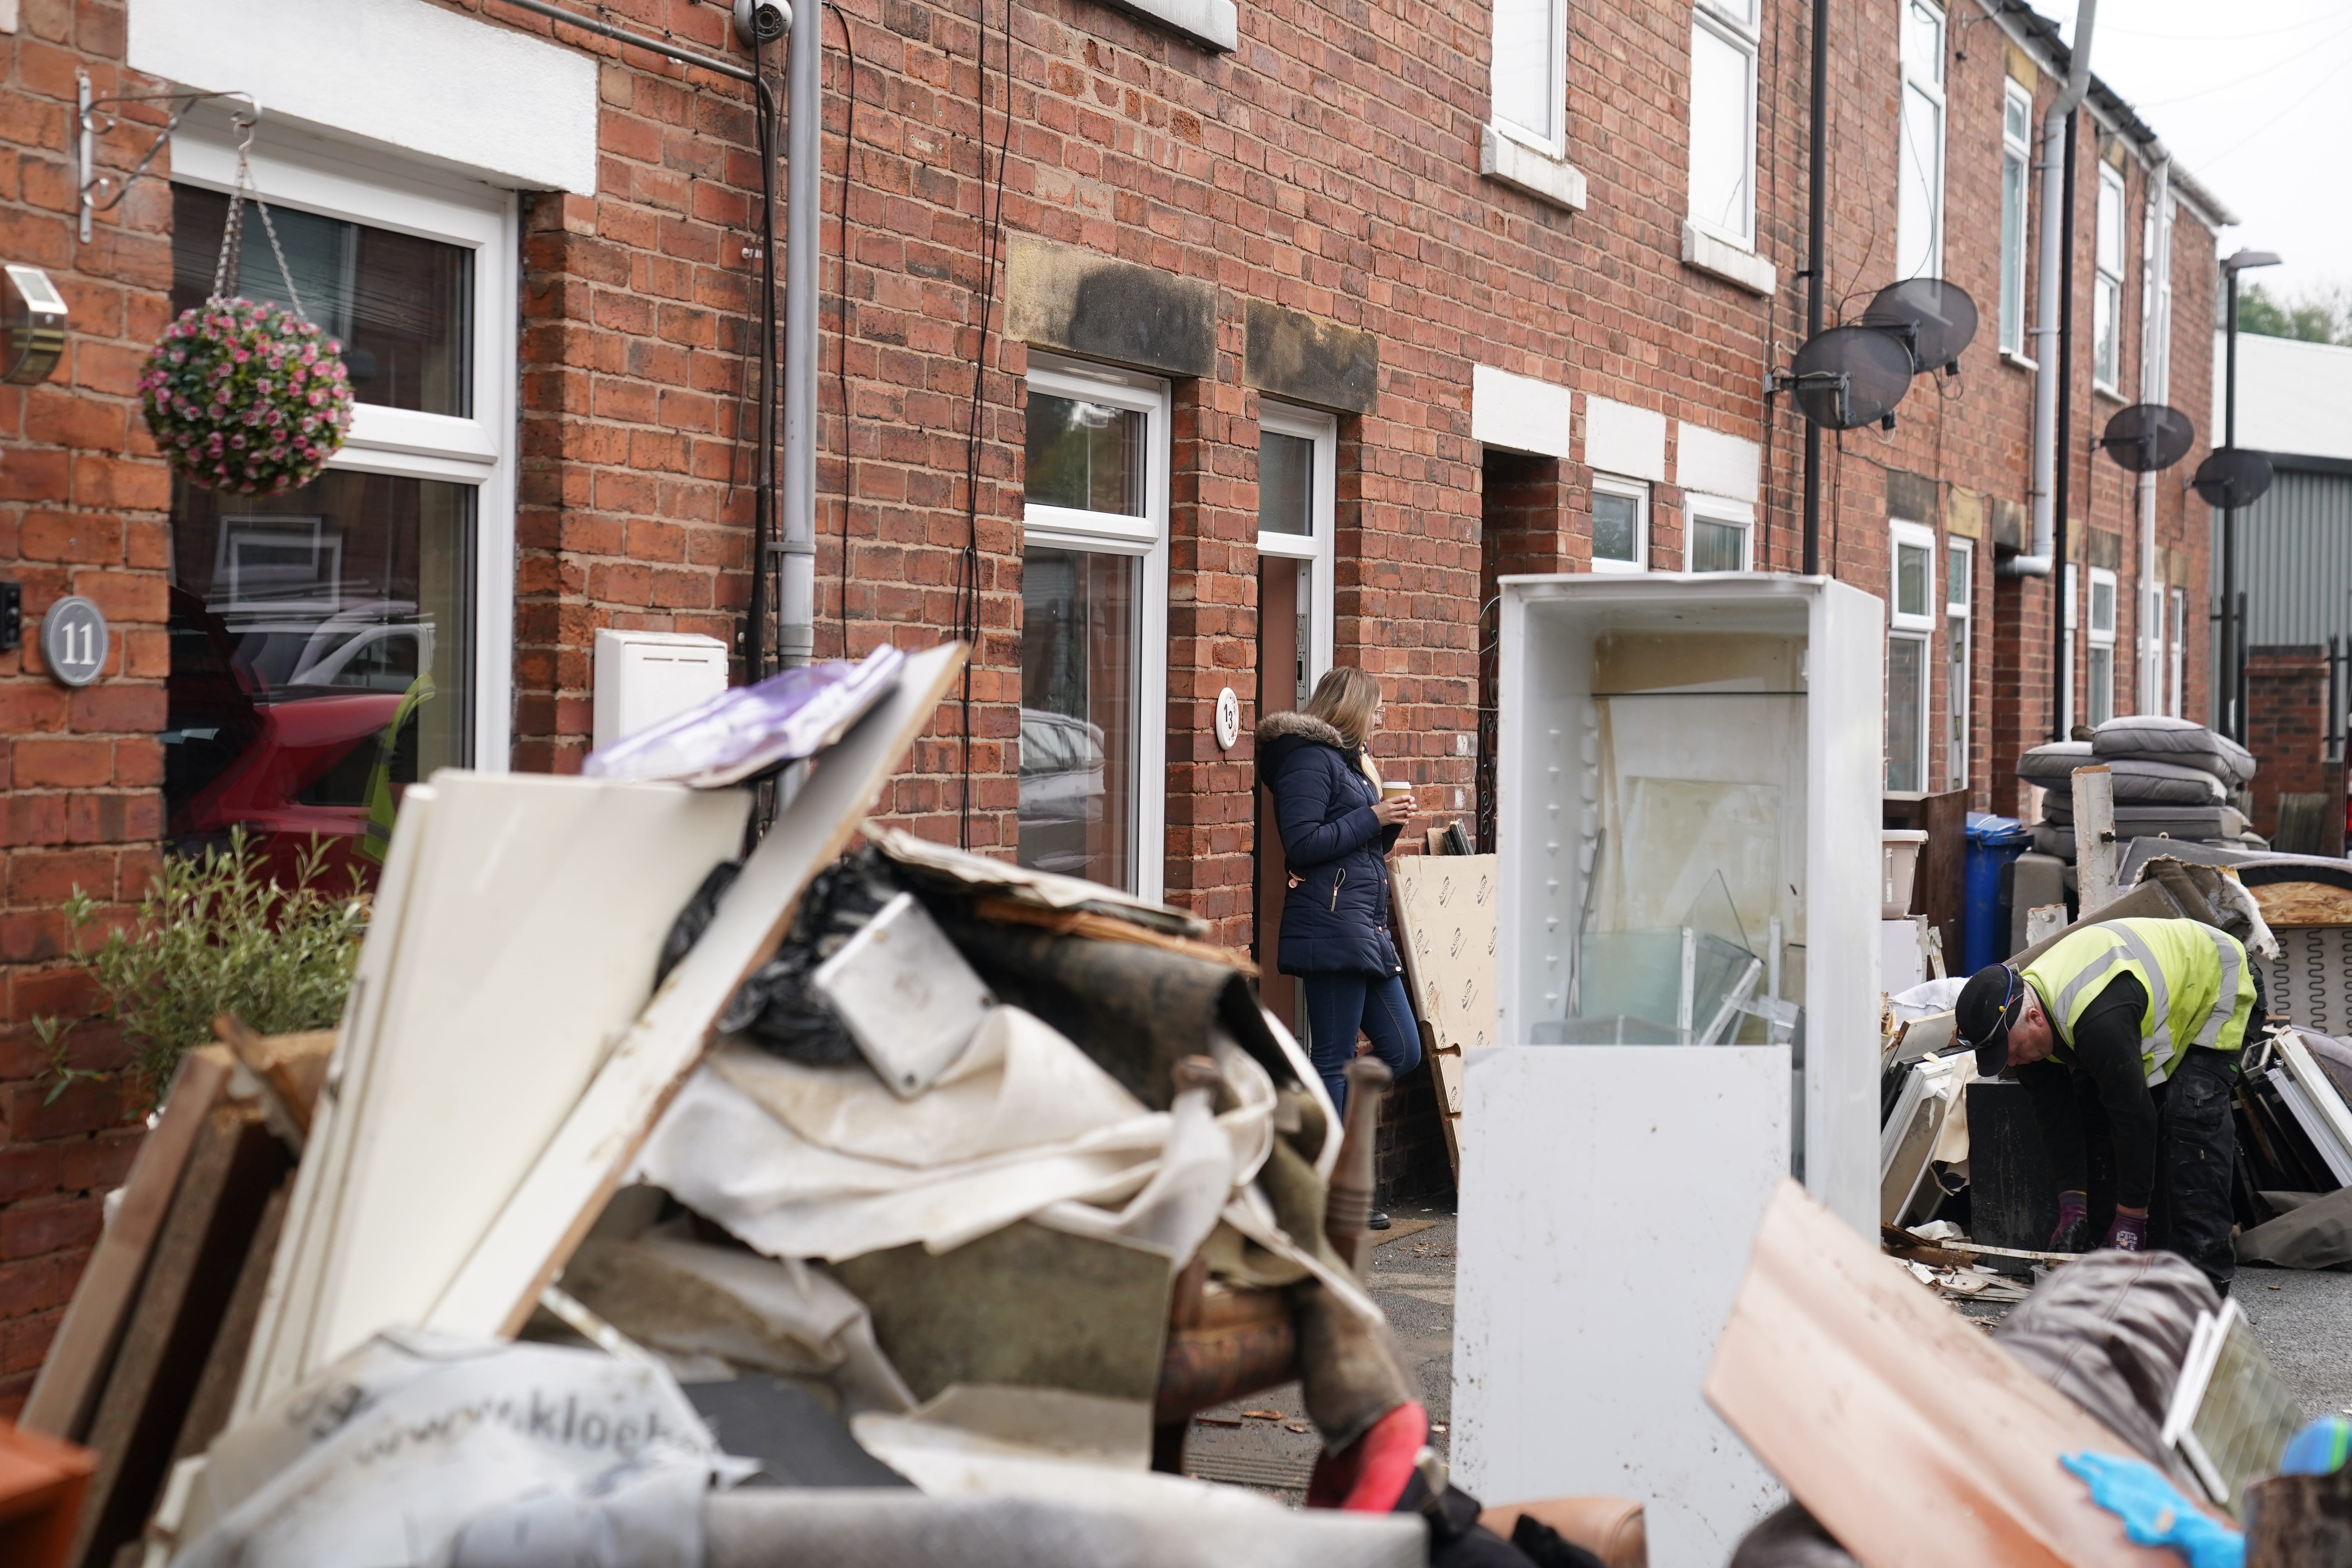 A local authority worker collecting damaged furniture from outside a property in Chesterfield following the storm